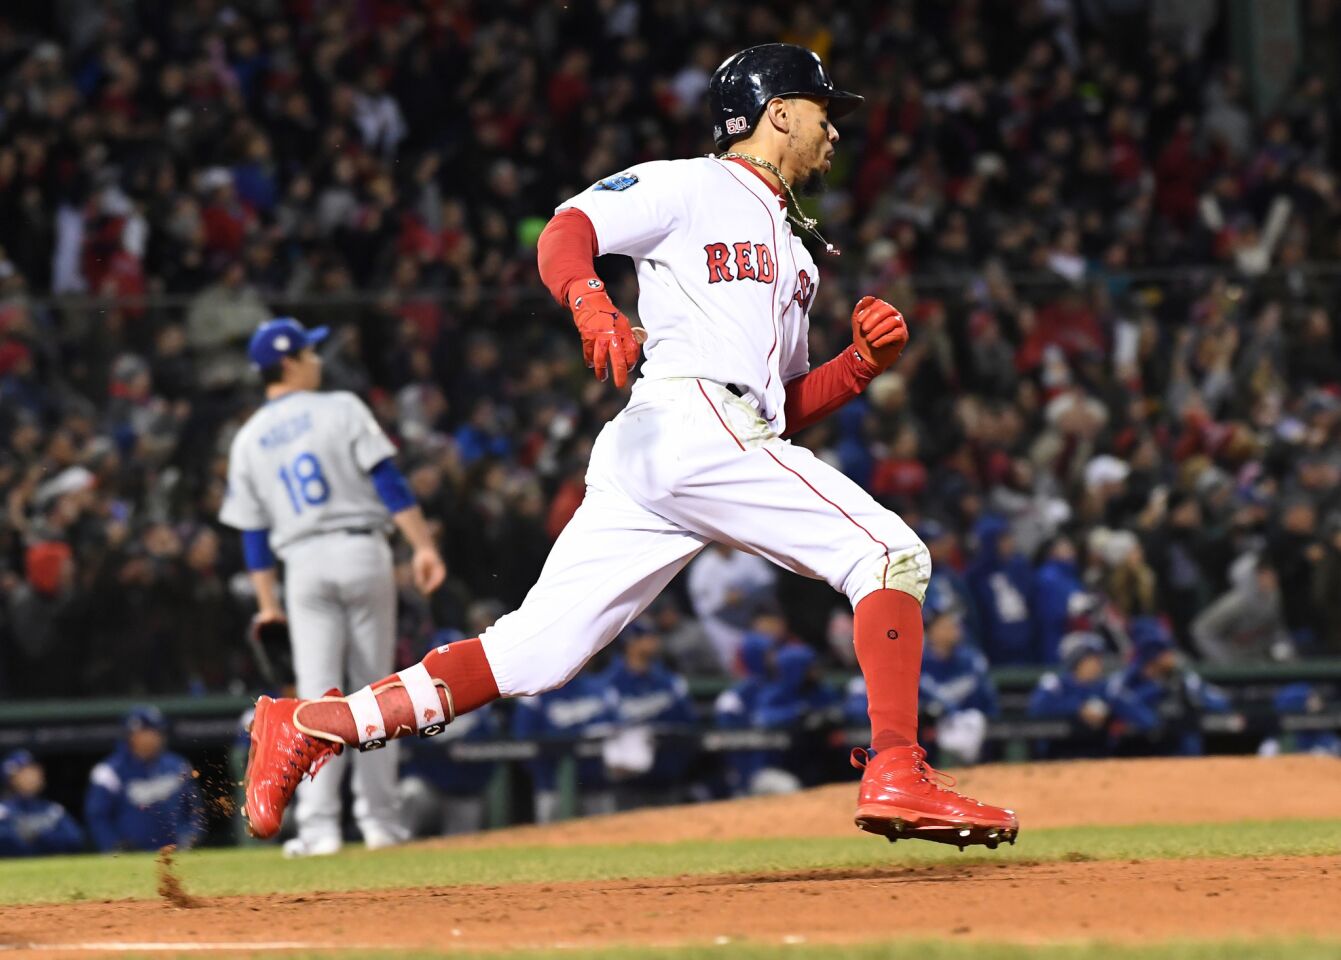 Red Sox's Mookie Betts scores a run in the fifth inning of game two of the World Series against the Dodgers at Fenway Park.